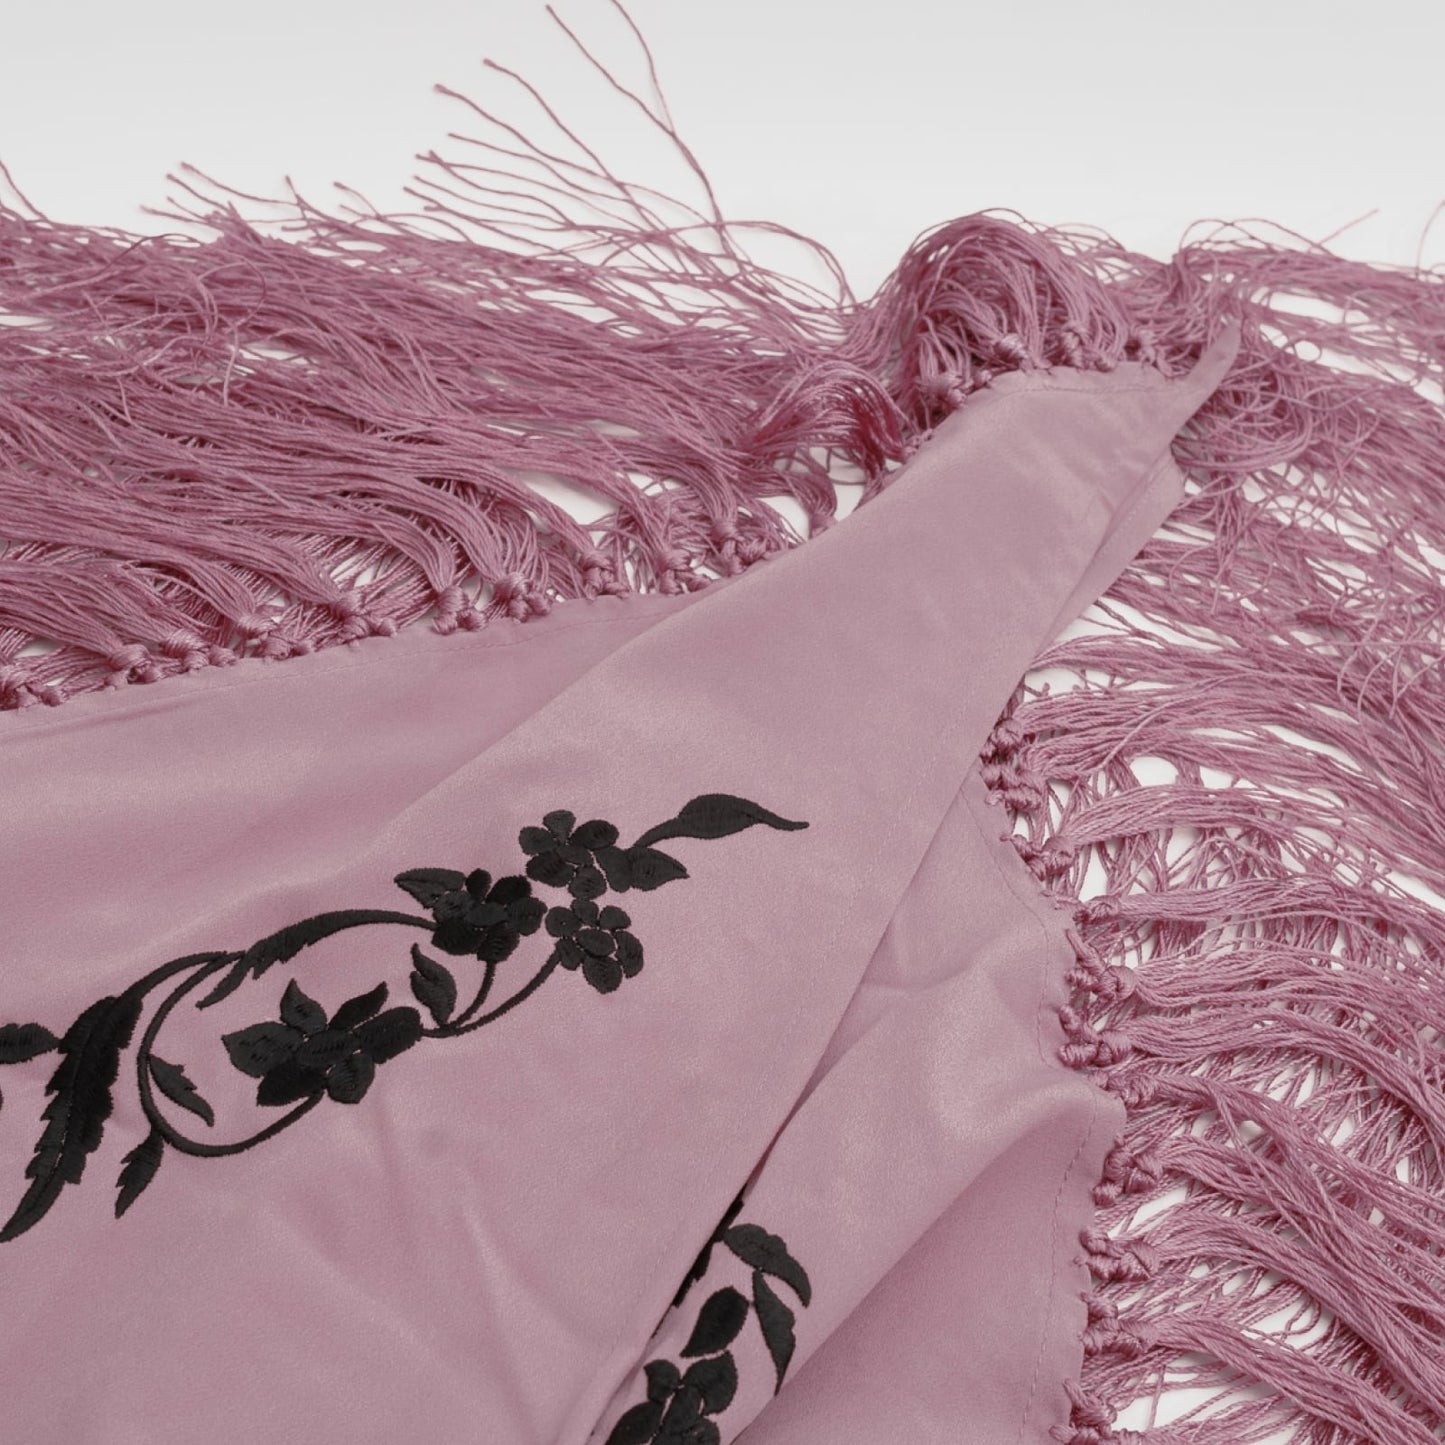 Rose and black floral embroidered mantoncillo shawl in crespon.